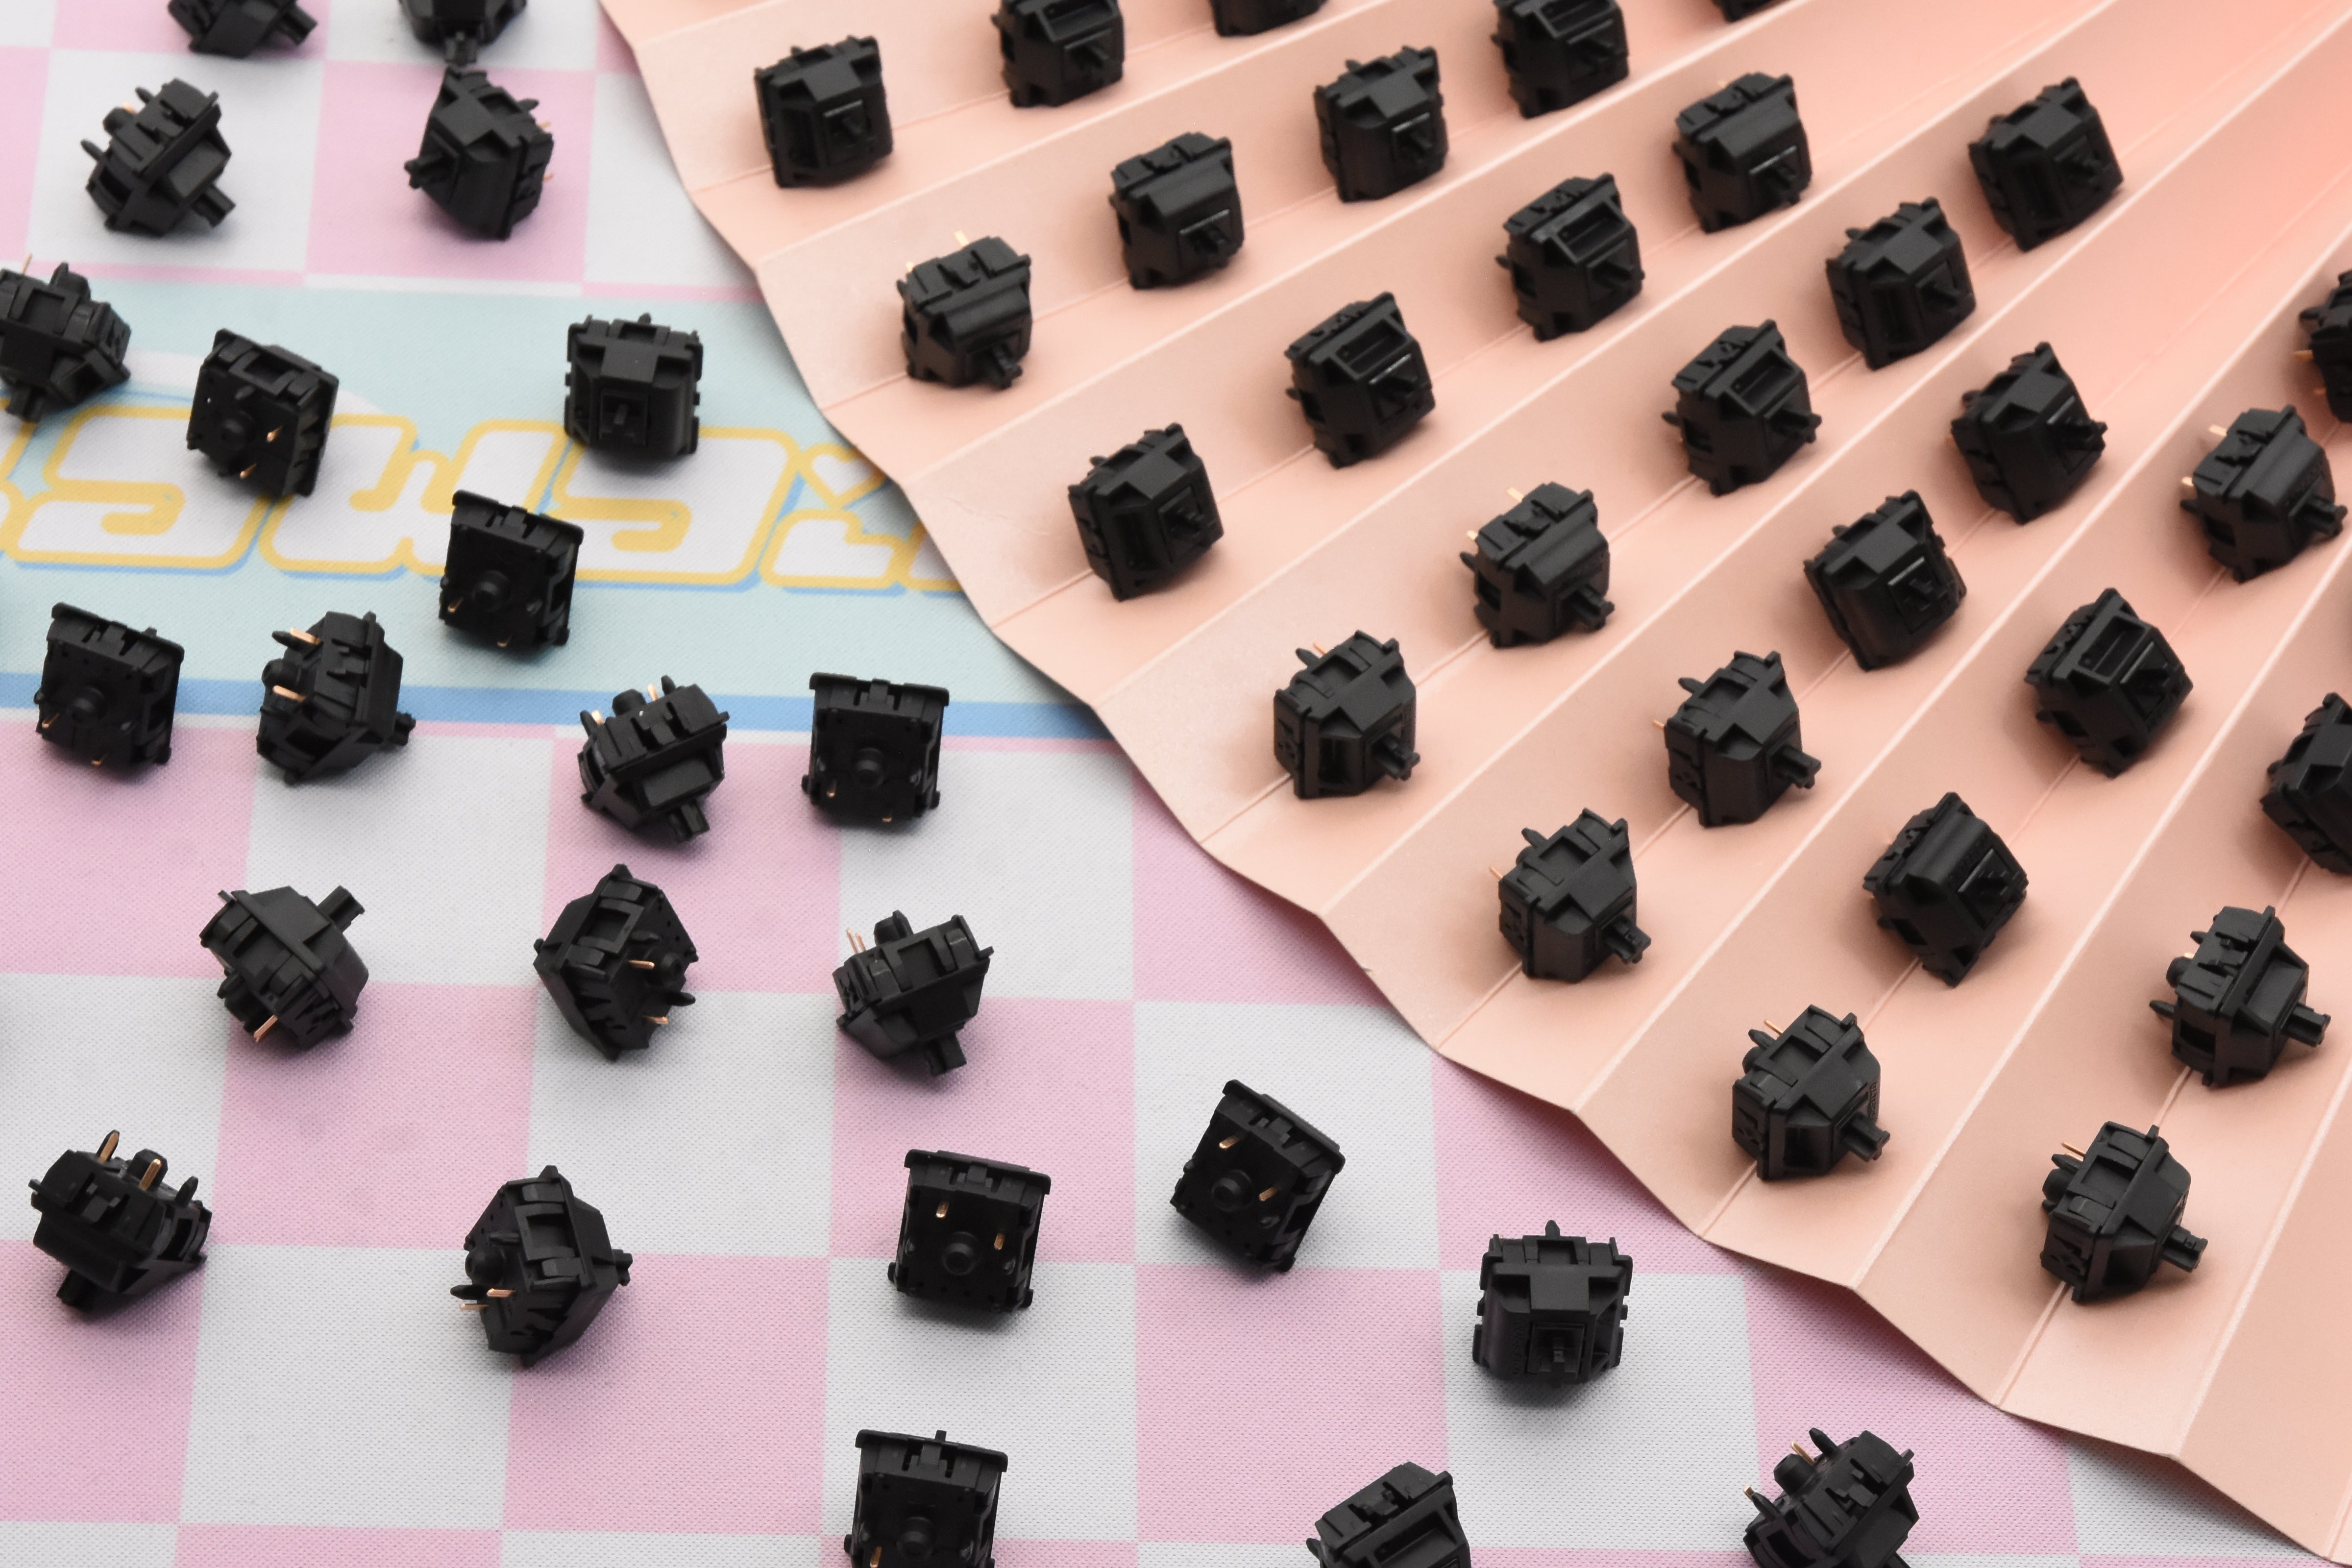 SILLYWORKS X GATERON TYPE S LINEAR SWITCH FACTORY LUBED EDITION (10PCS)